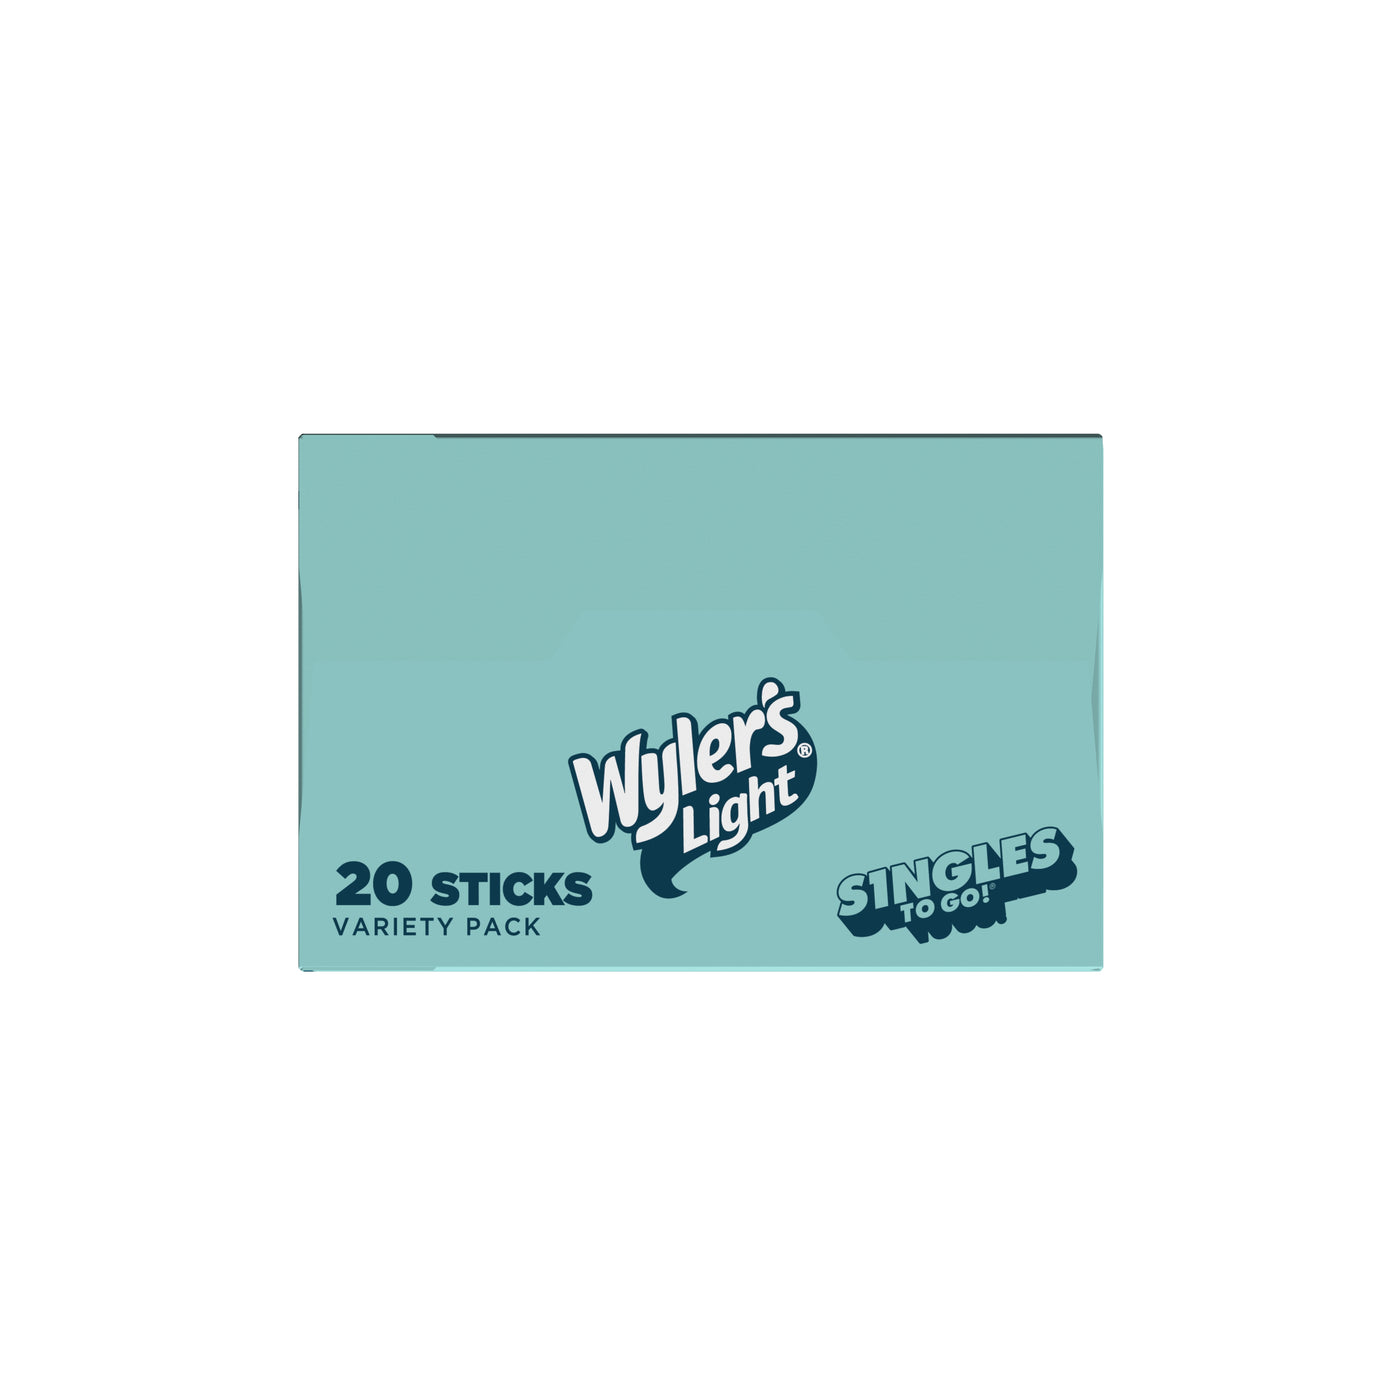 Wyler's Light Viral Vibes top of Box, Classic flavors for Water, Flavored Water Packets, Flavored Water Packet Variety pack